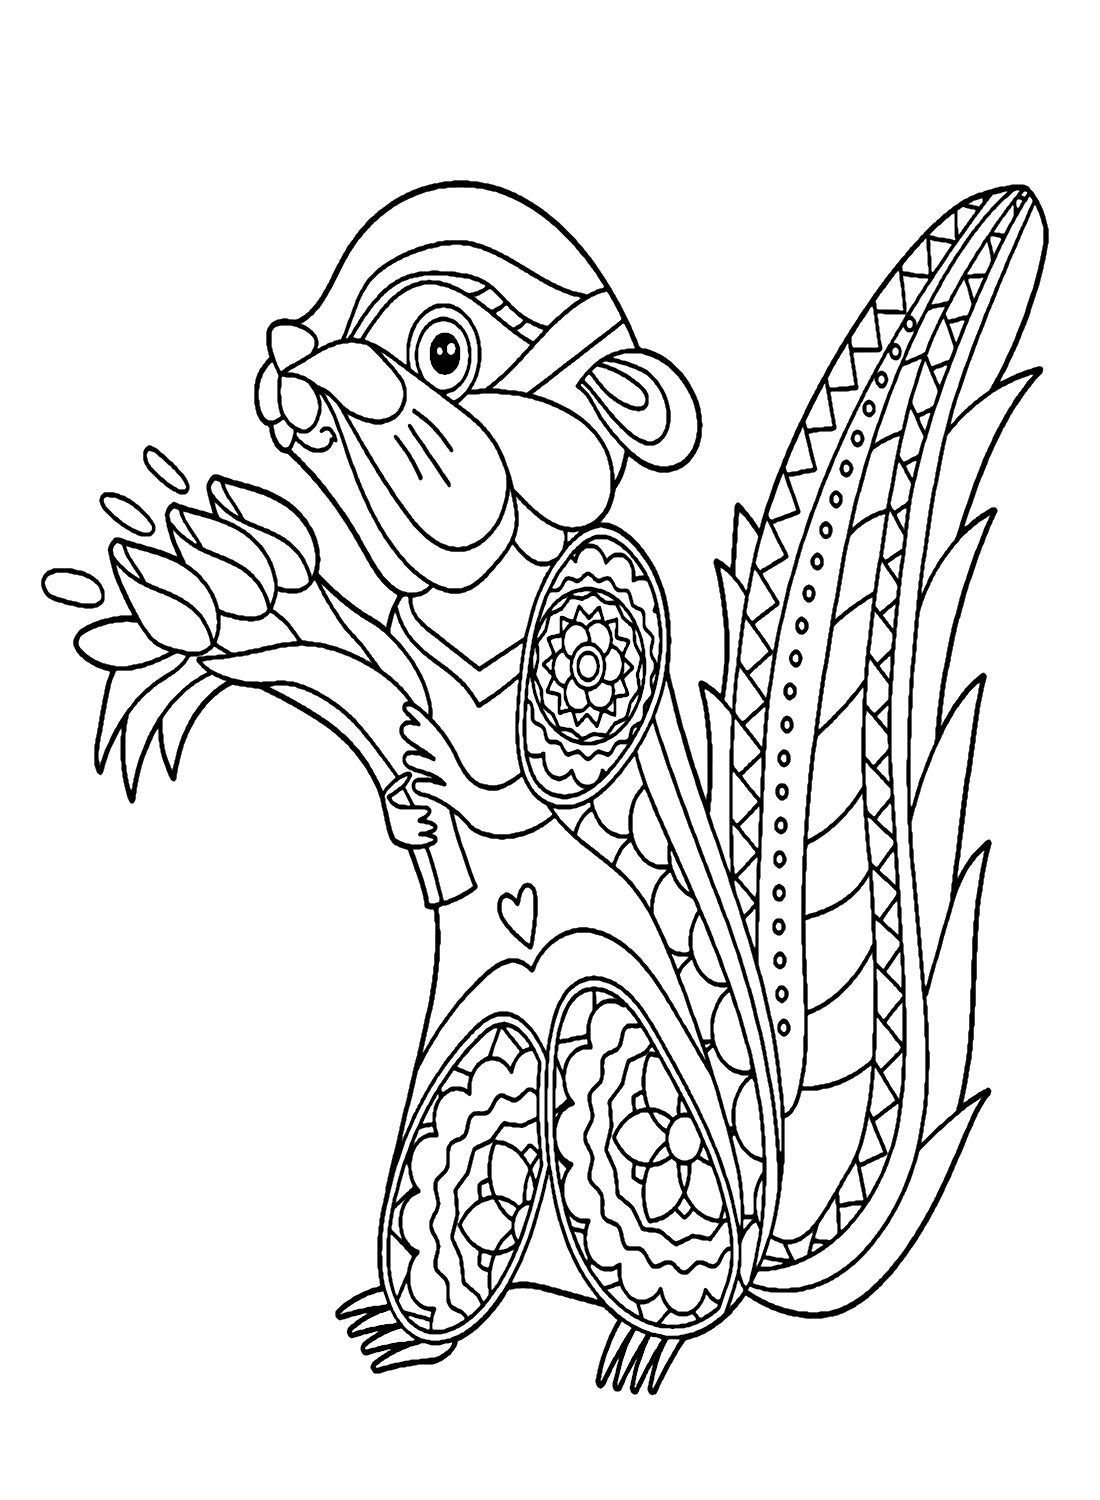 Cute Chipmunk With Flowers Coloring Pages